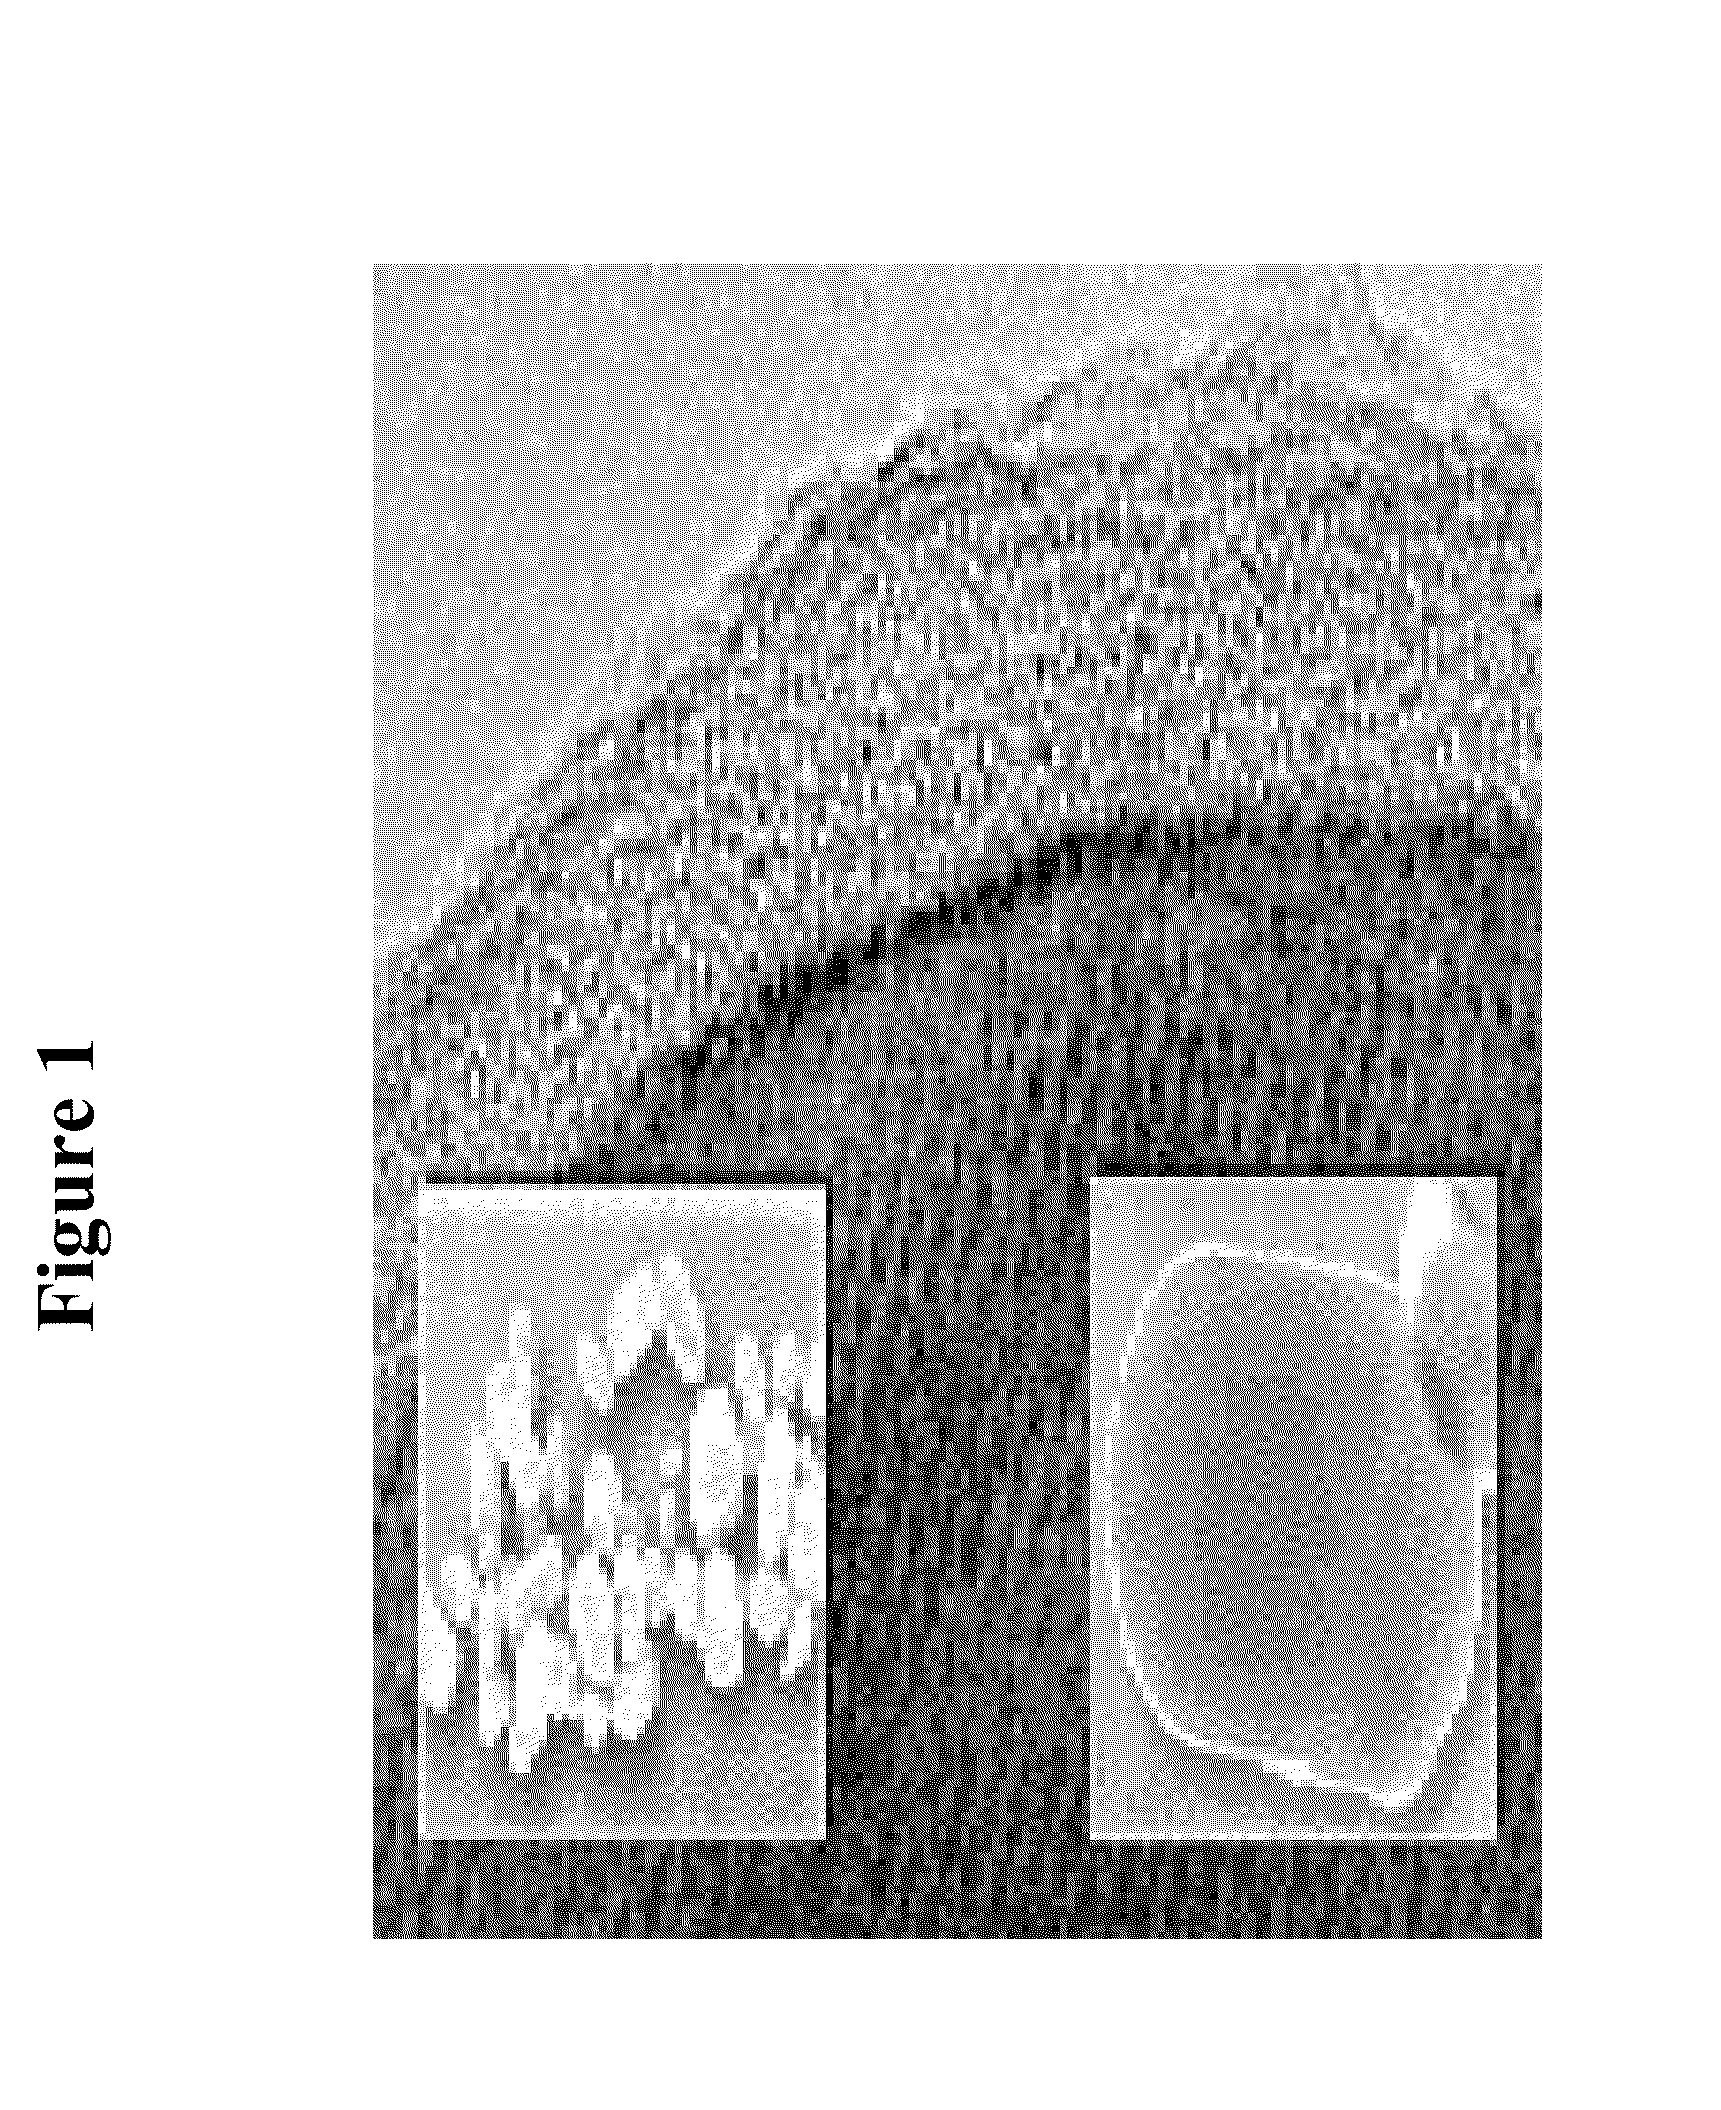 Method for improving the effectiveness of titanium dioxide-containing coatings